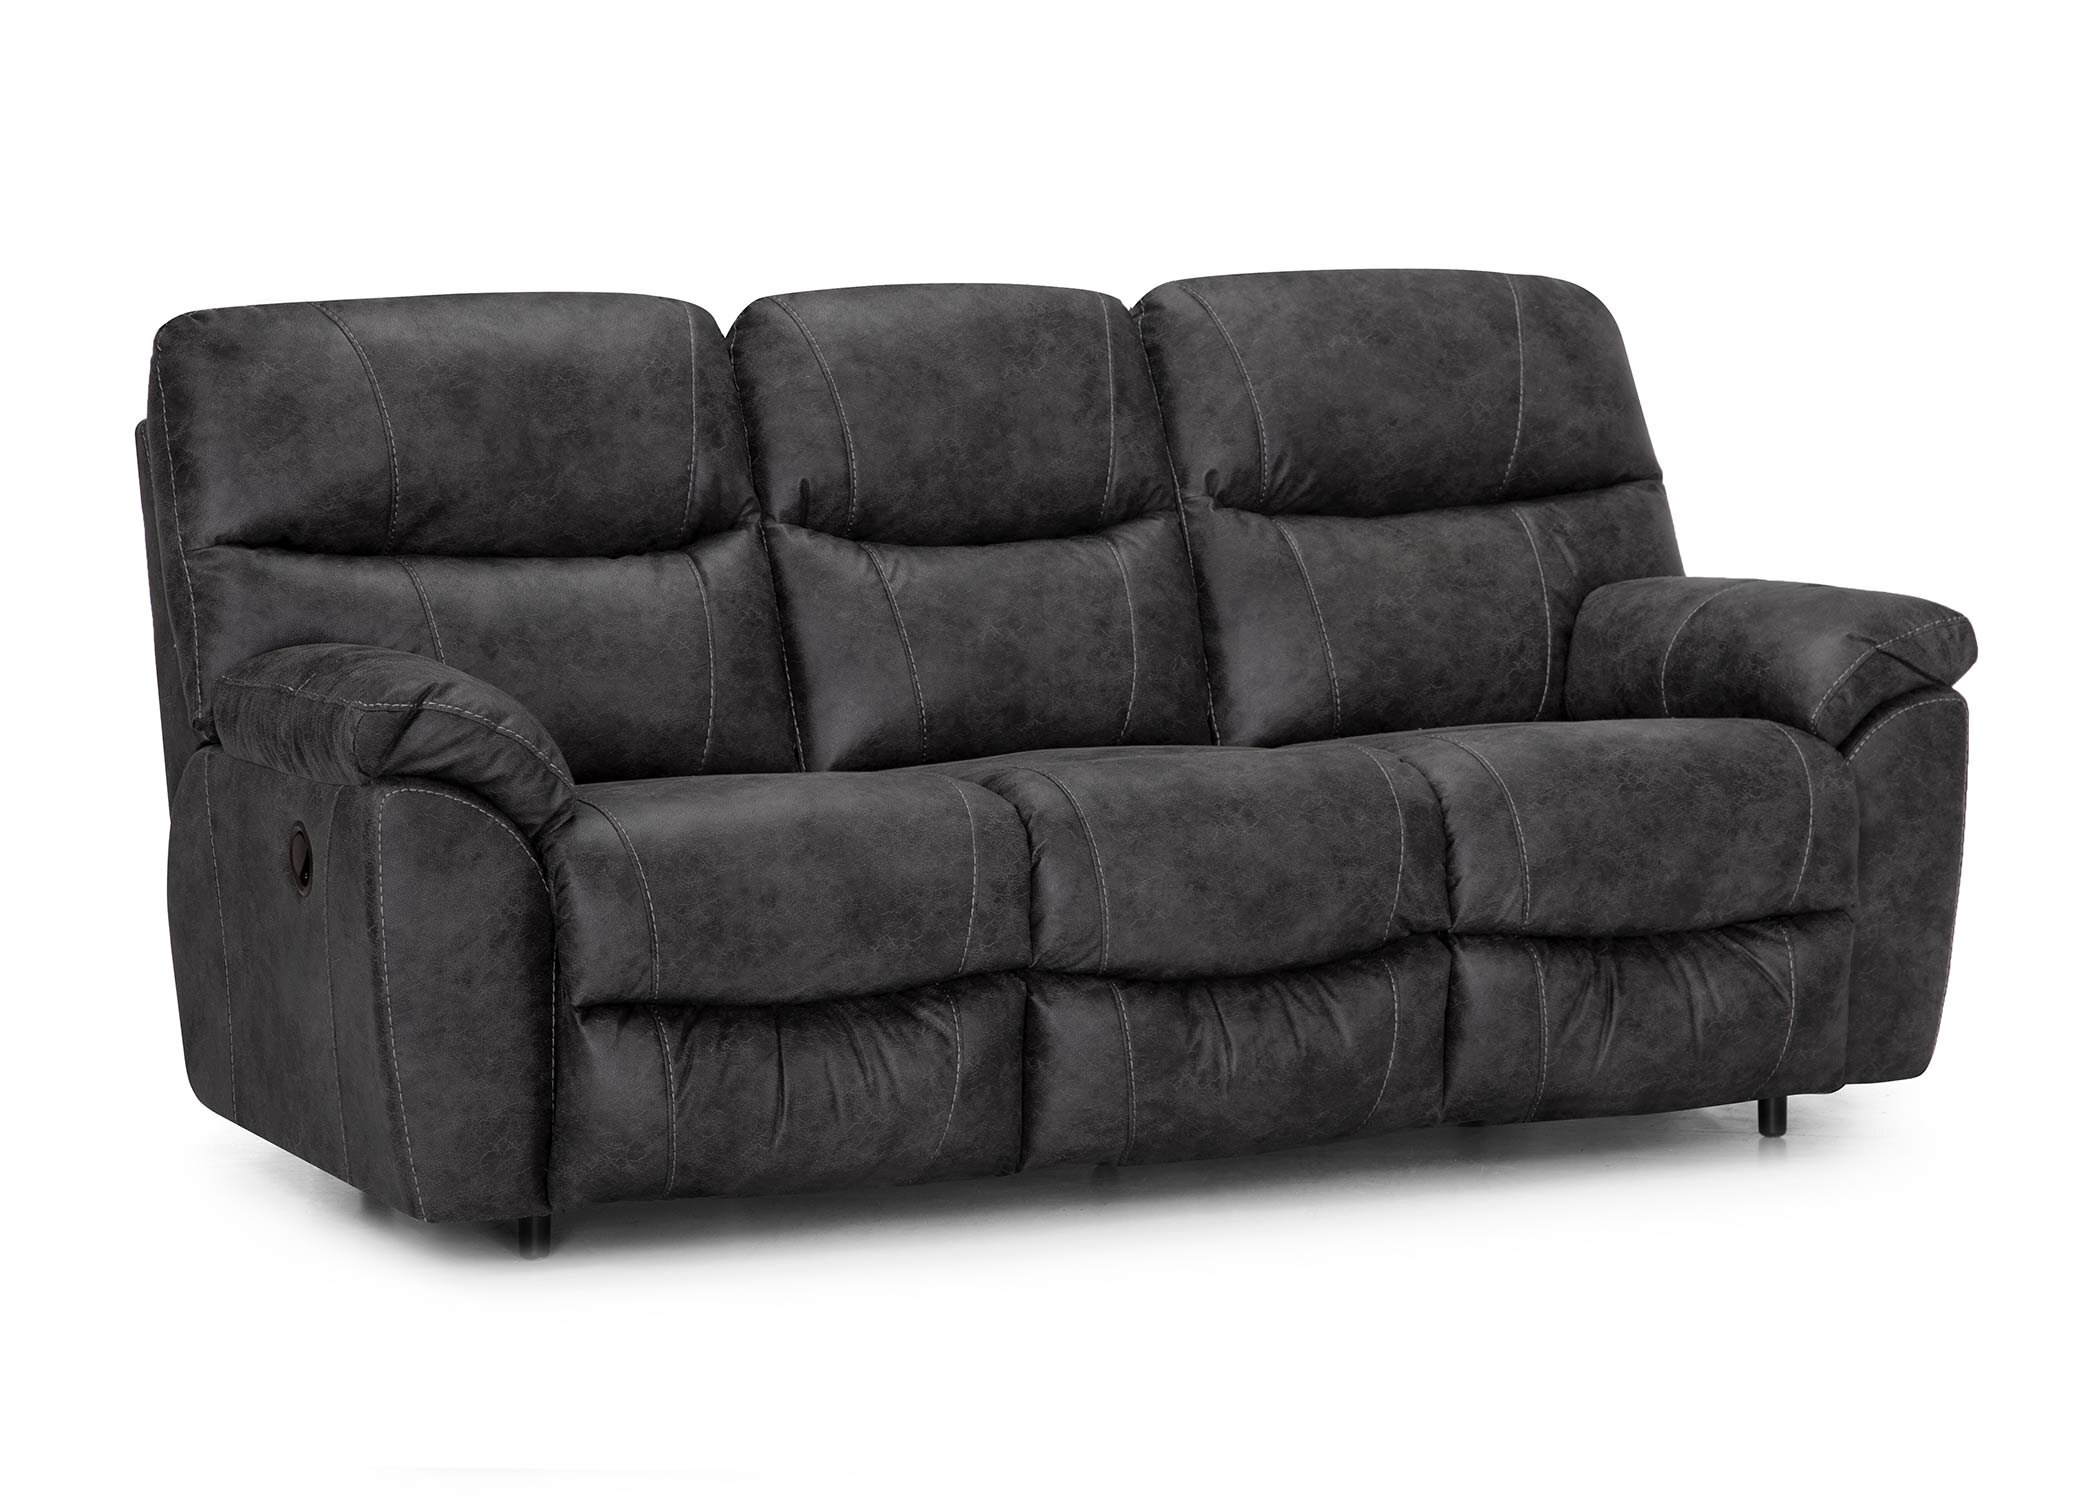  70742 Cabot Sofa in 1914-05 Chief Charcoal 